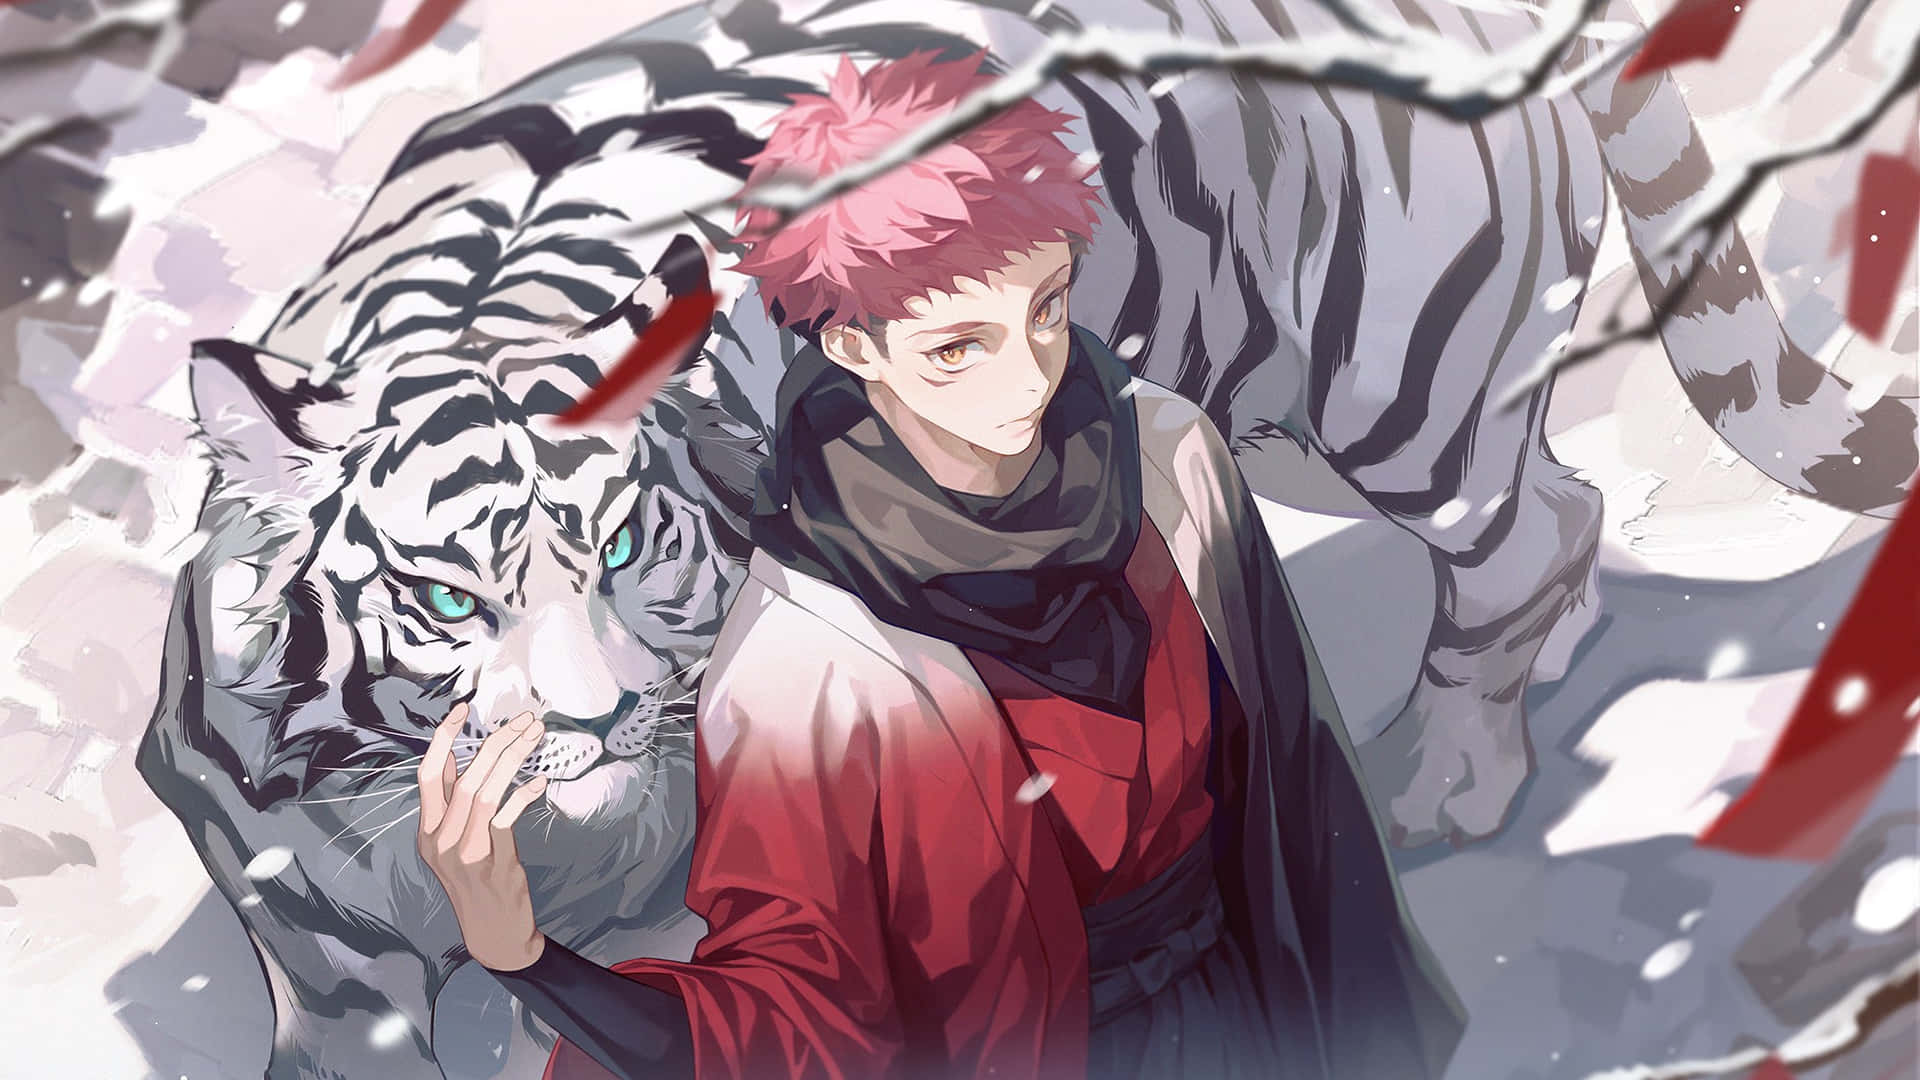 Anime Aesthetic Pfp Of Yuji With White Tiger Wallpaper